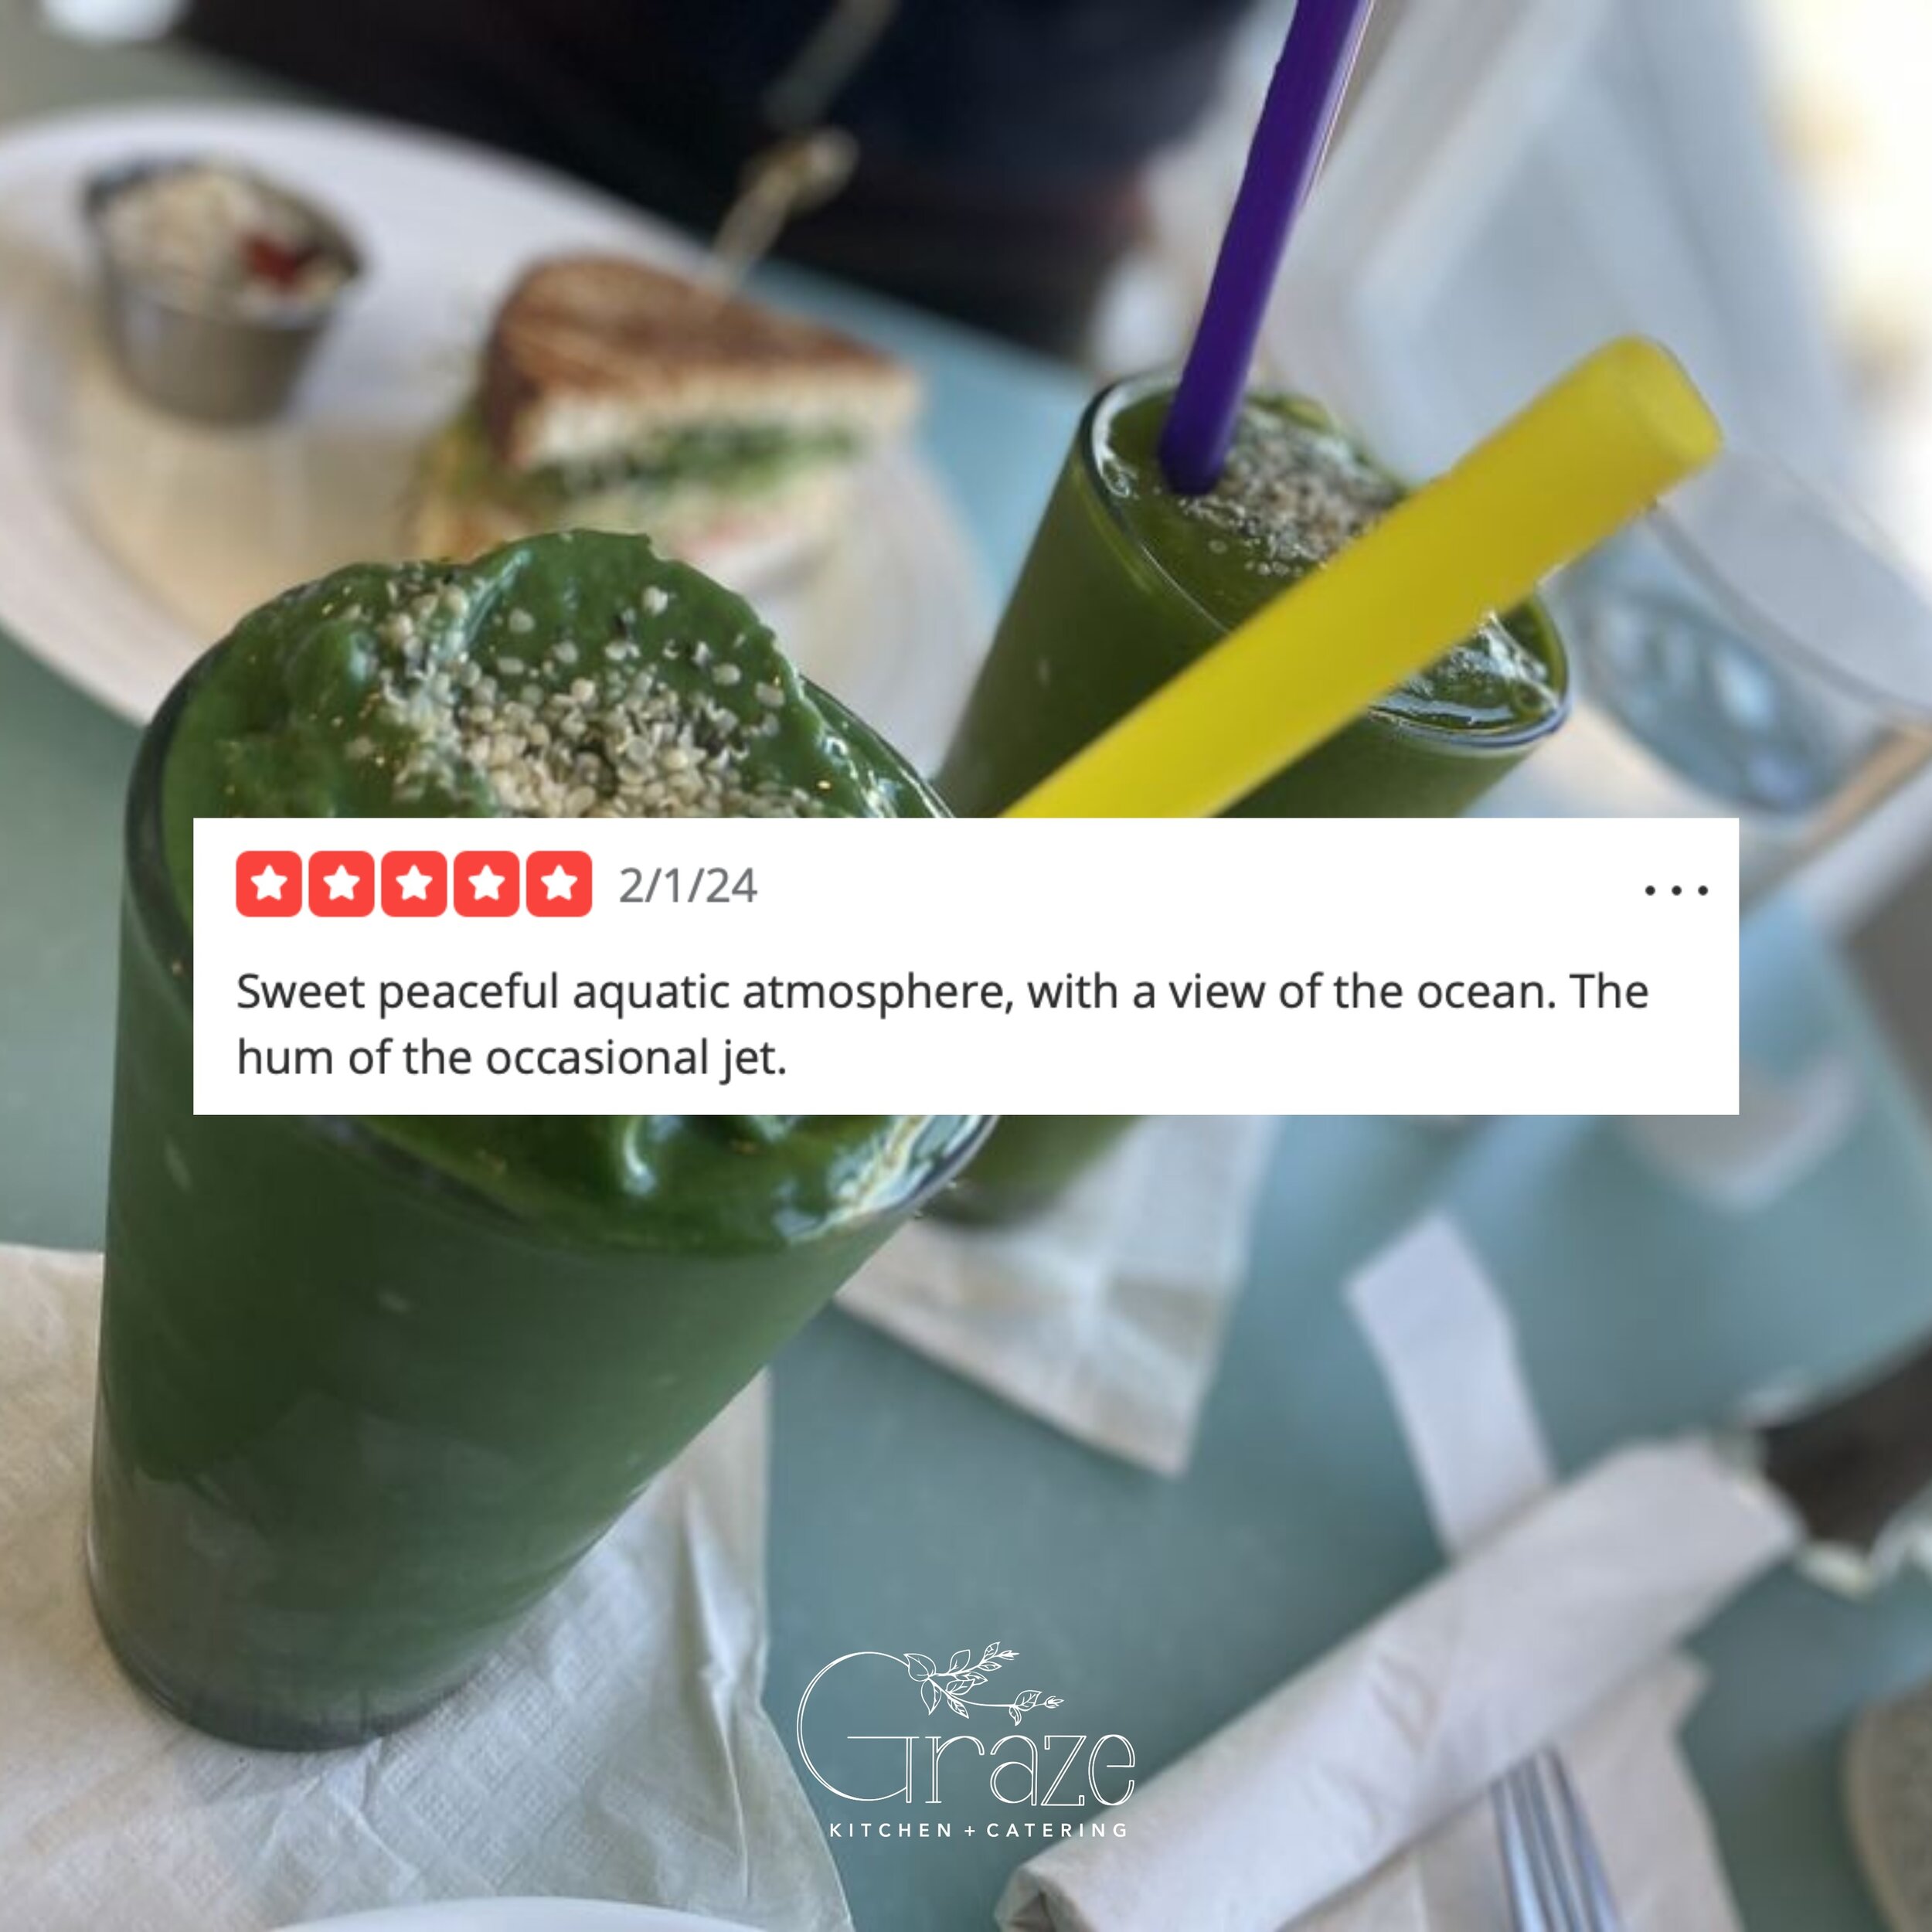 We couldn&rsquo;t have said it better.✈️🫶🏽Thank you for the #yelpreview Sam! 

Remember, today is the last day we&rsquo;re open this week! Come by between 11-3 for a meal or to enjoy the view.

#dontforgettosaygraze #grazekitchenvb #757eats #757foo